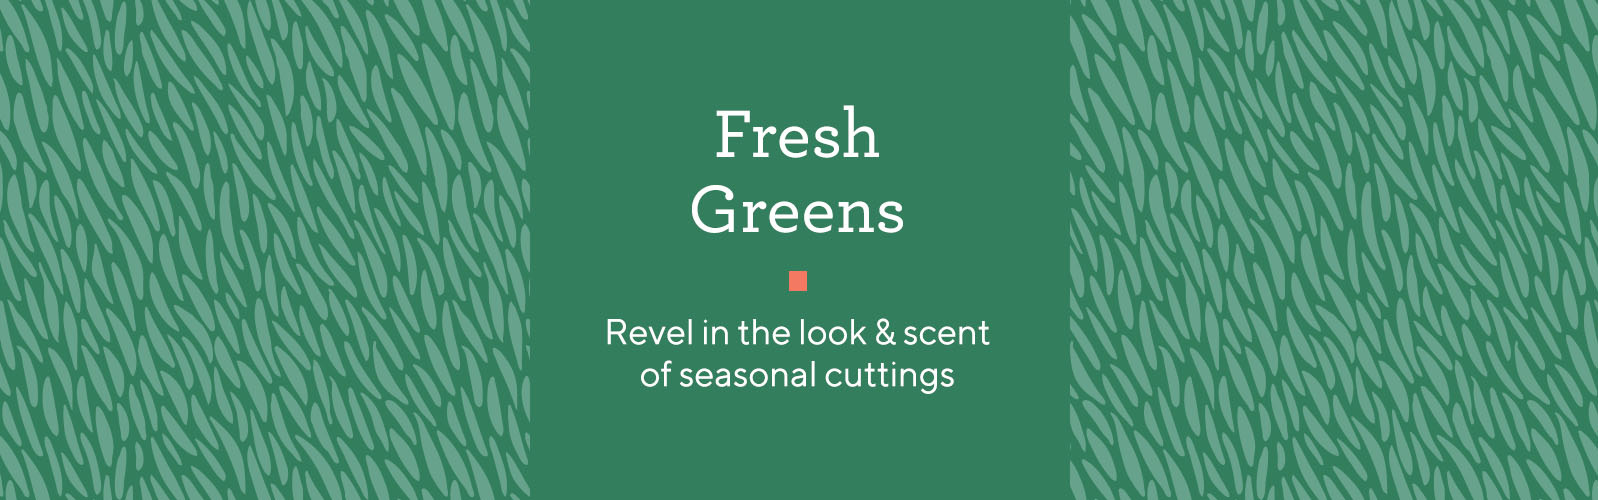 Fresh Greens.  Revel in the look & scent of seasonal cuttings